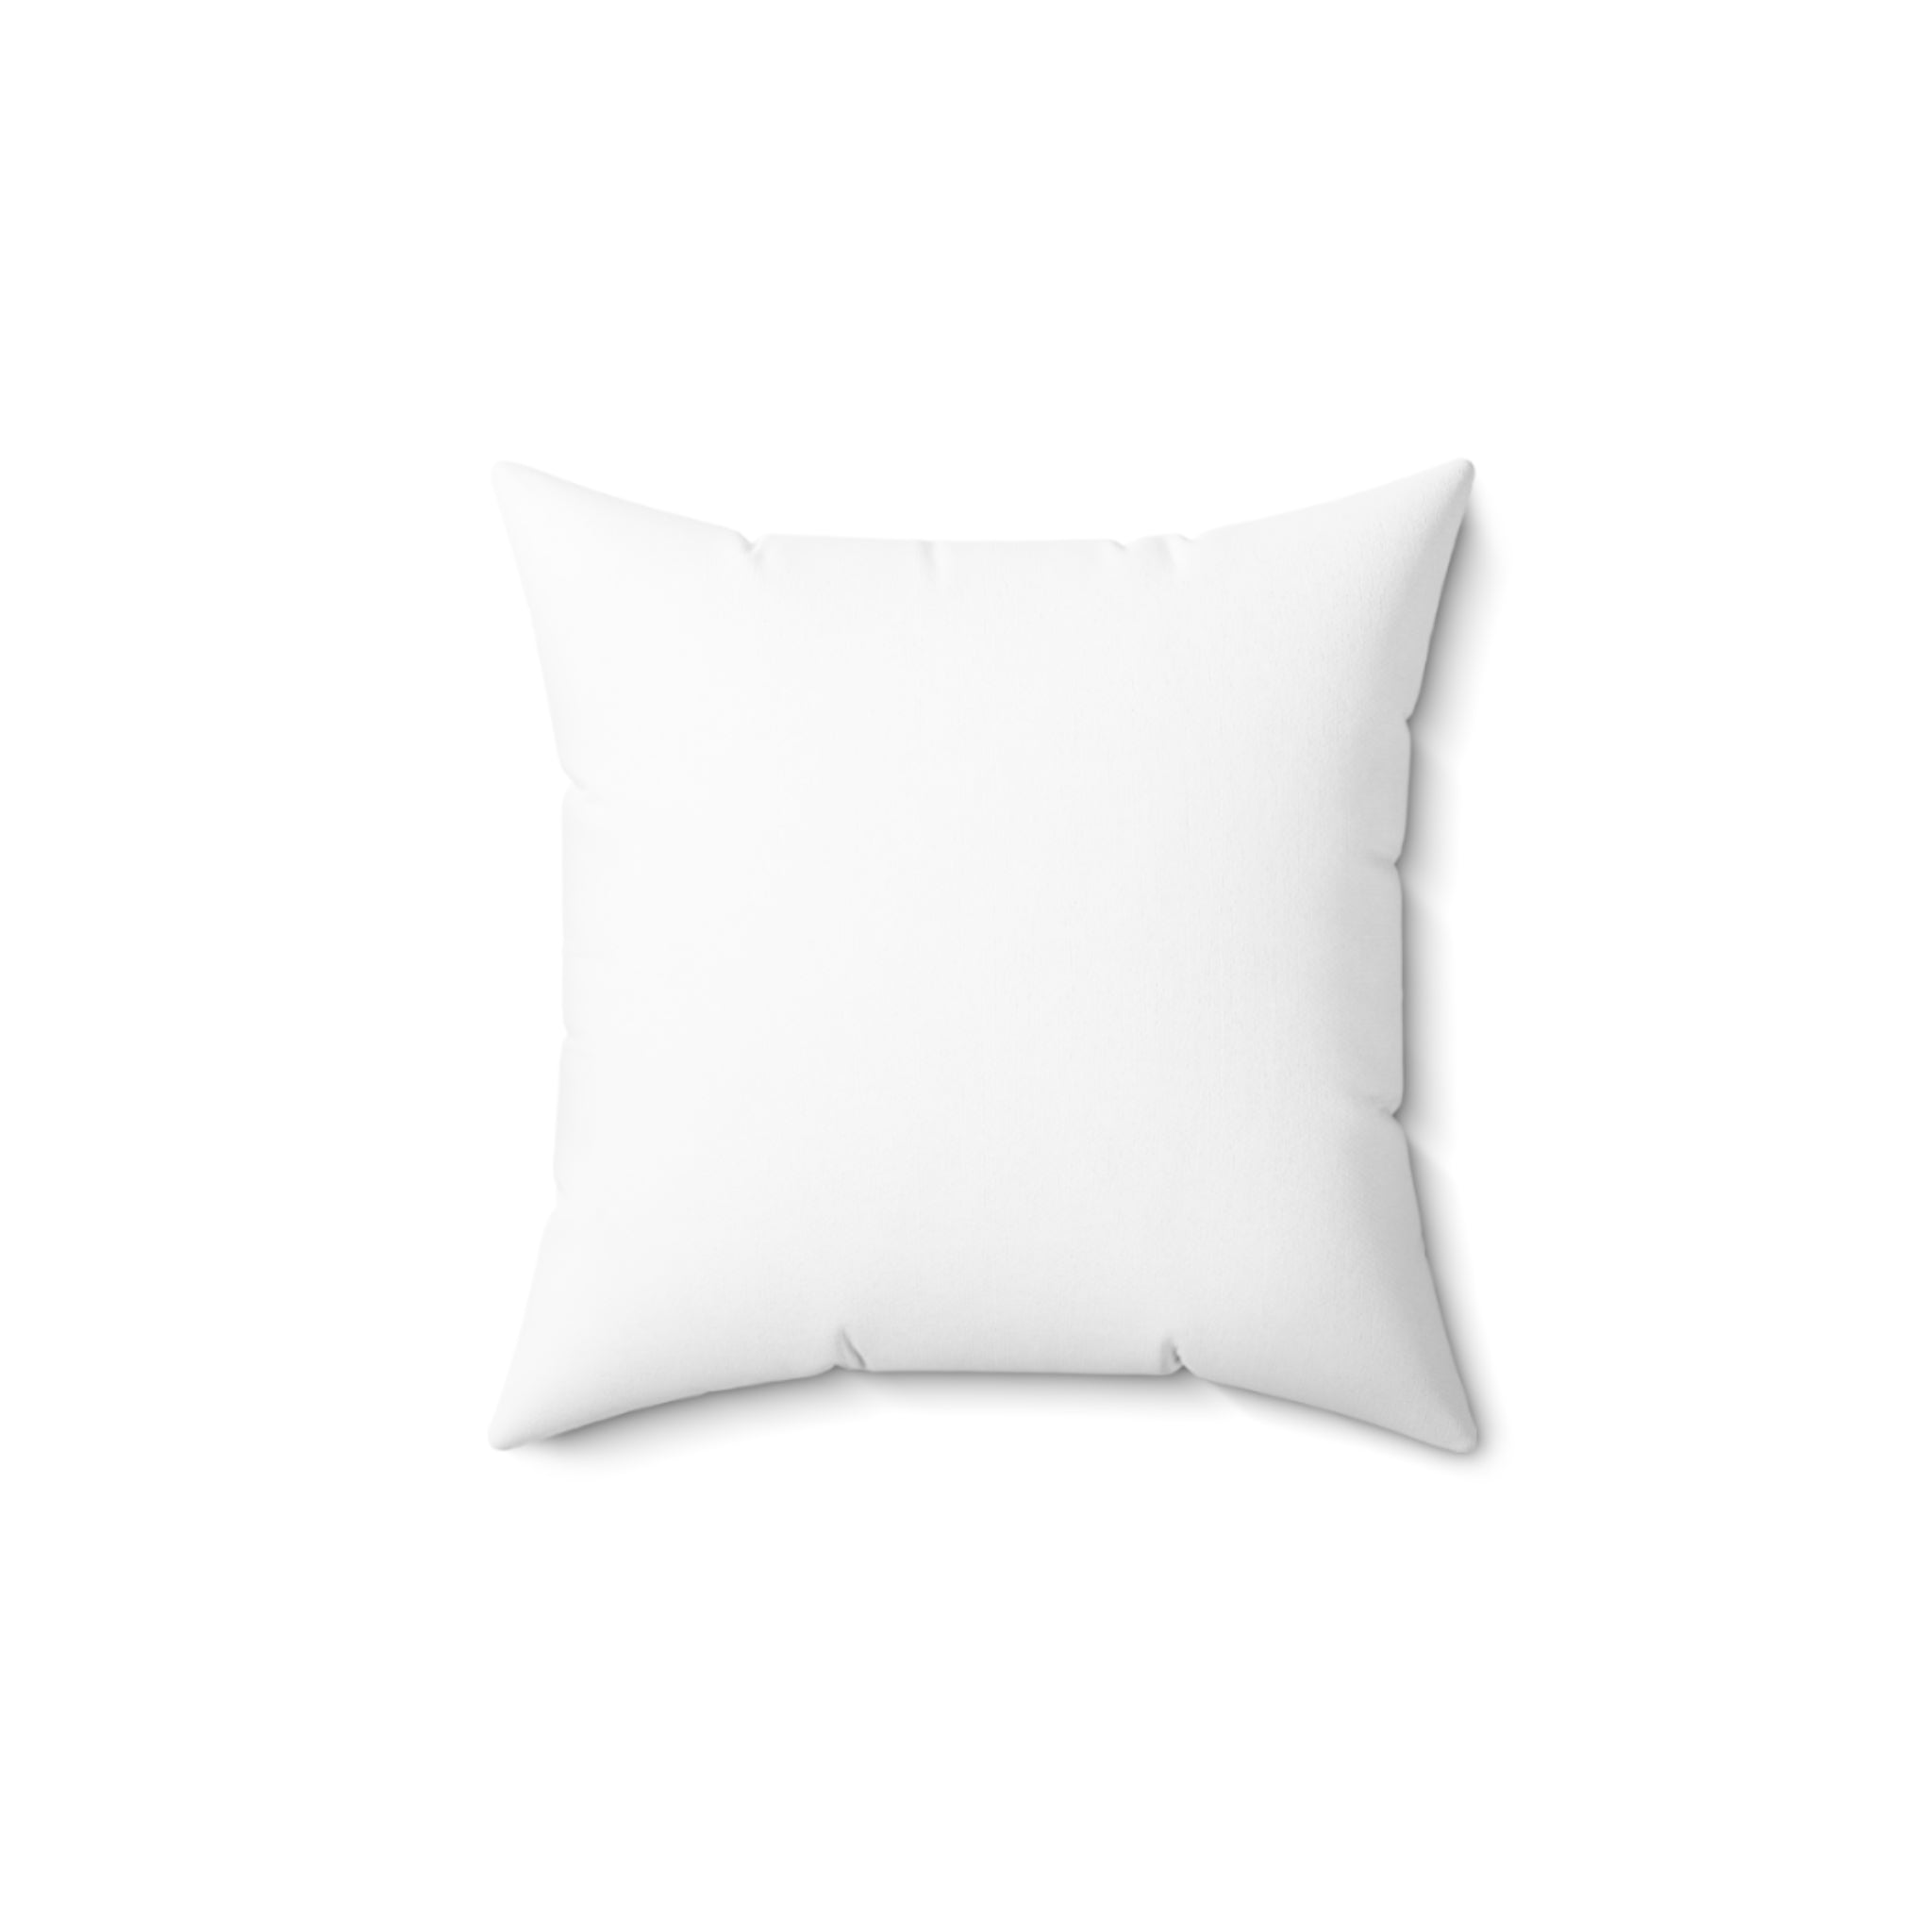 Grace a beautiful act of love and kindness, showing mercy, forgiveness Square Pillow 14 x 14